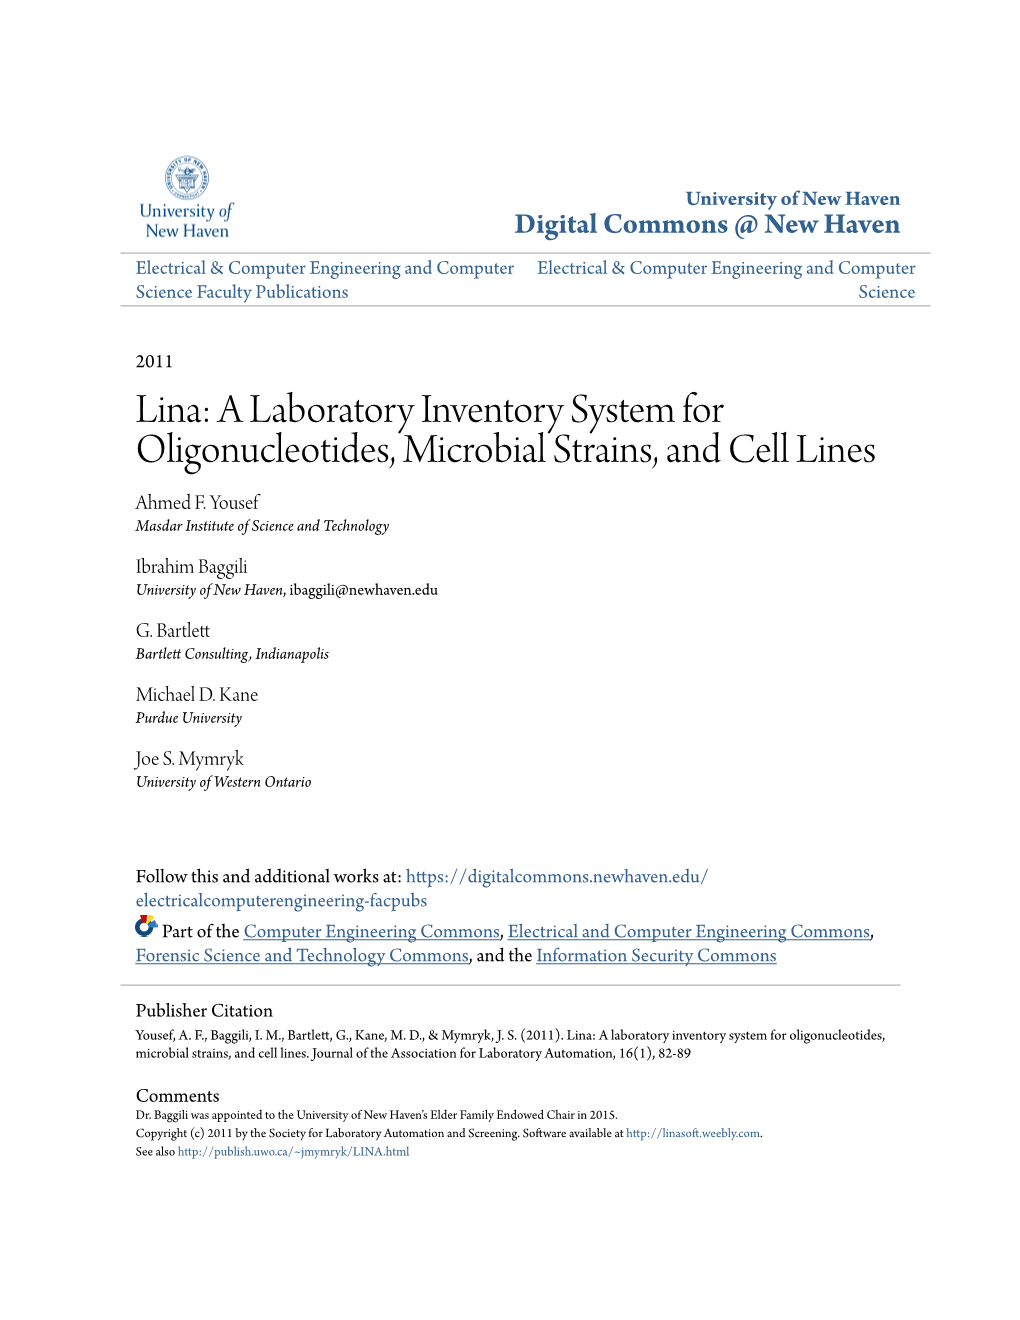 Lina: a Laboratory Inventory System for Oligonucleotides, Microbial Strains, and Cell Lines Ahmed F